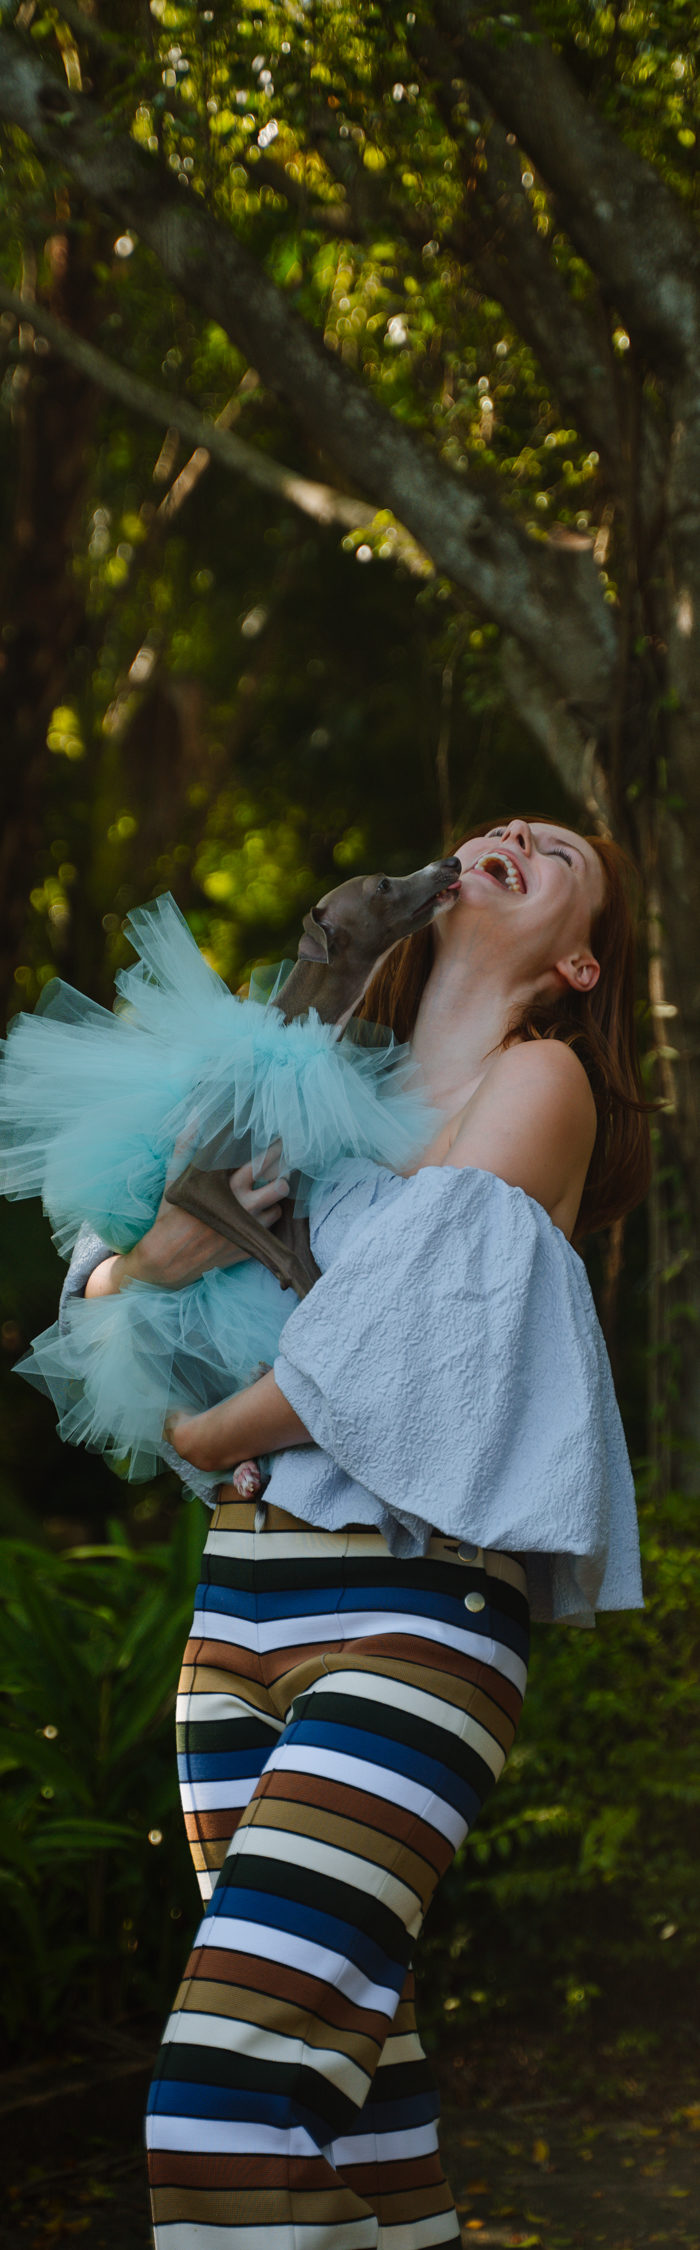 Miss USA 2011 Alyssa Campanella of The A List blog and her Italian Greyhound Luca on his first birthday